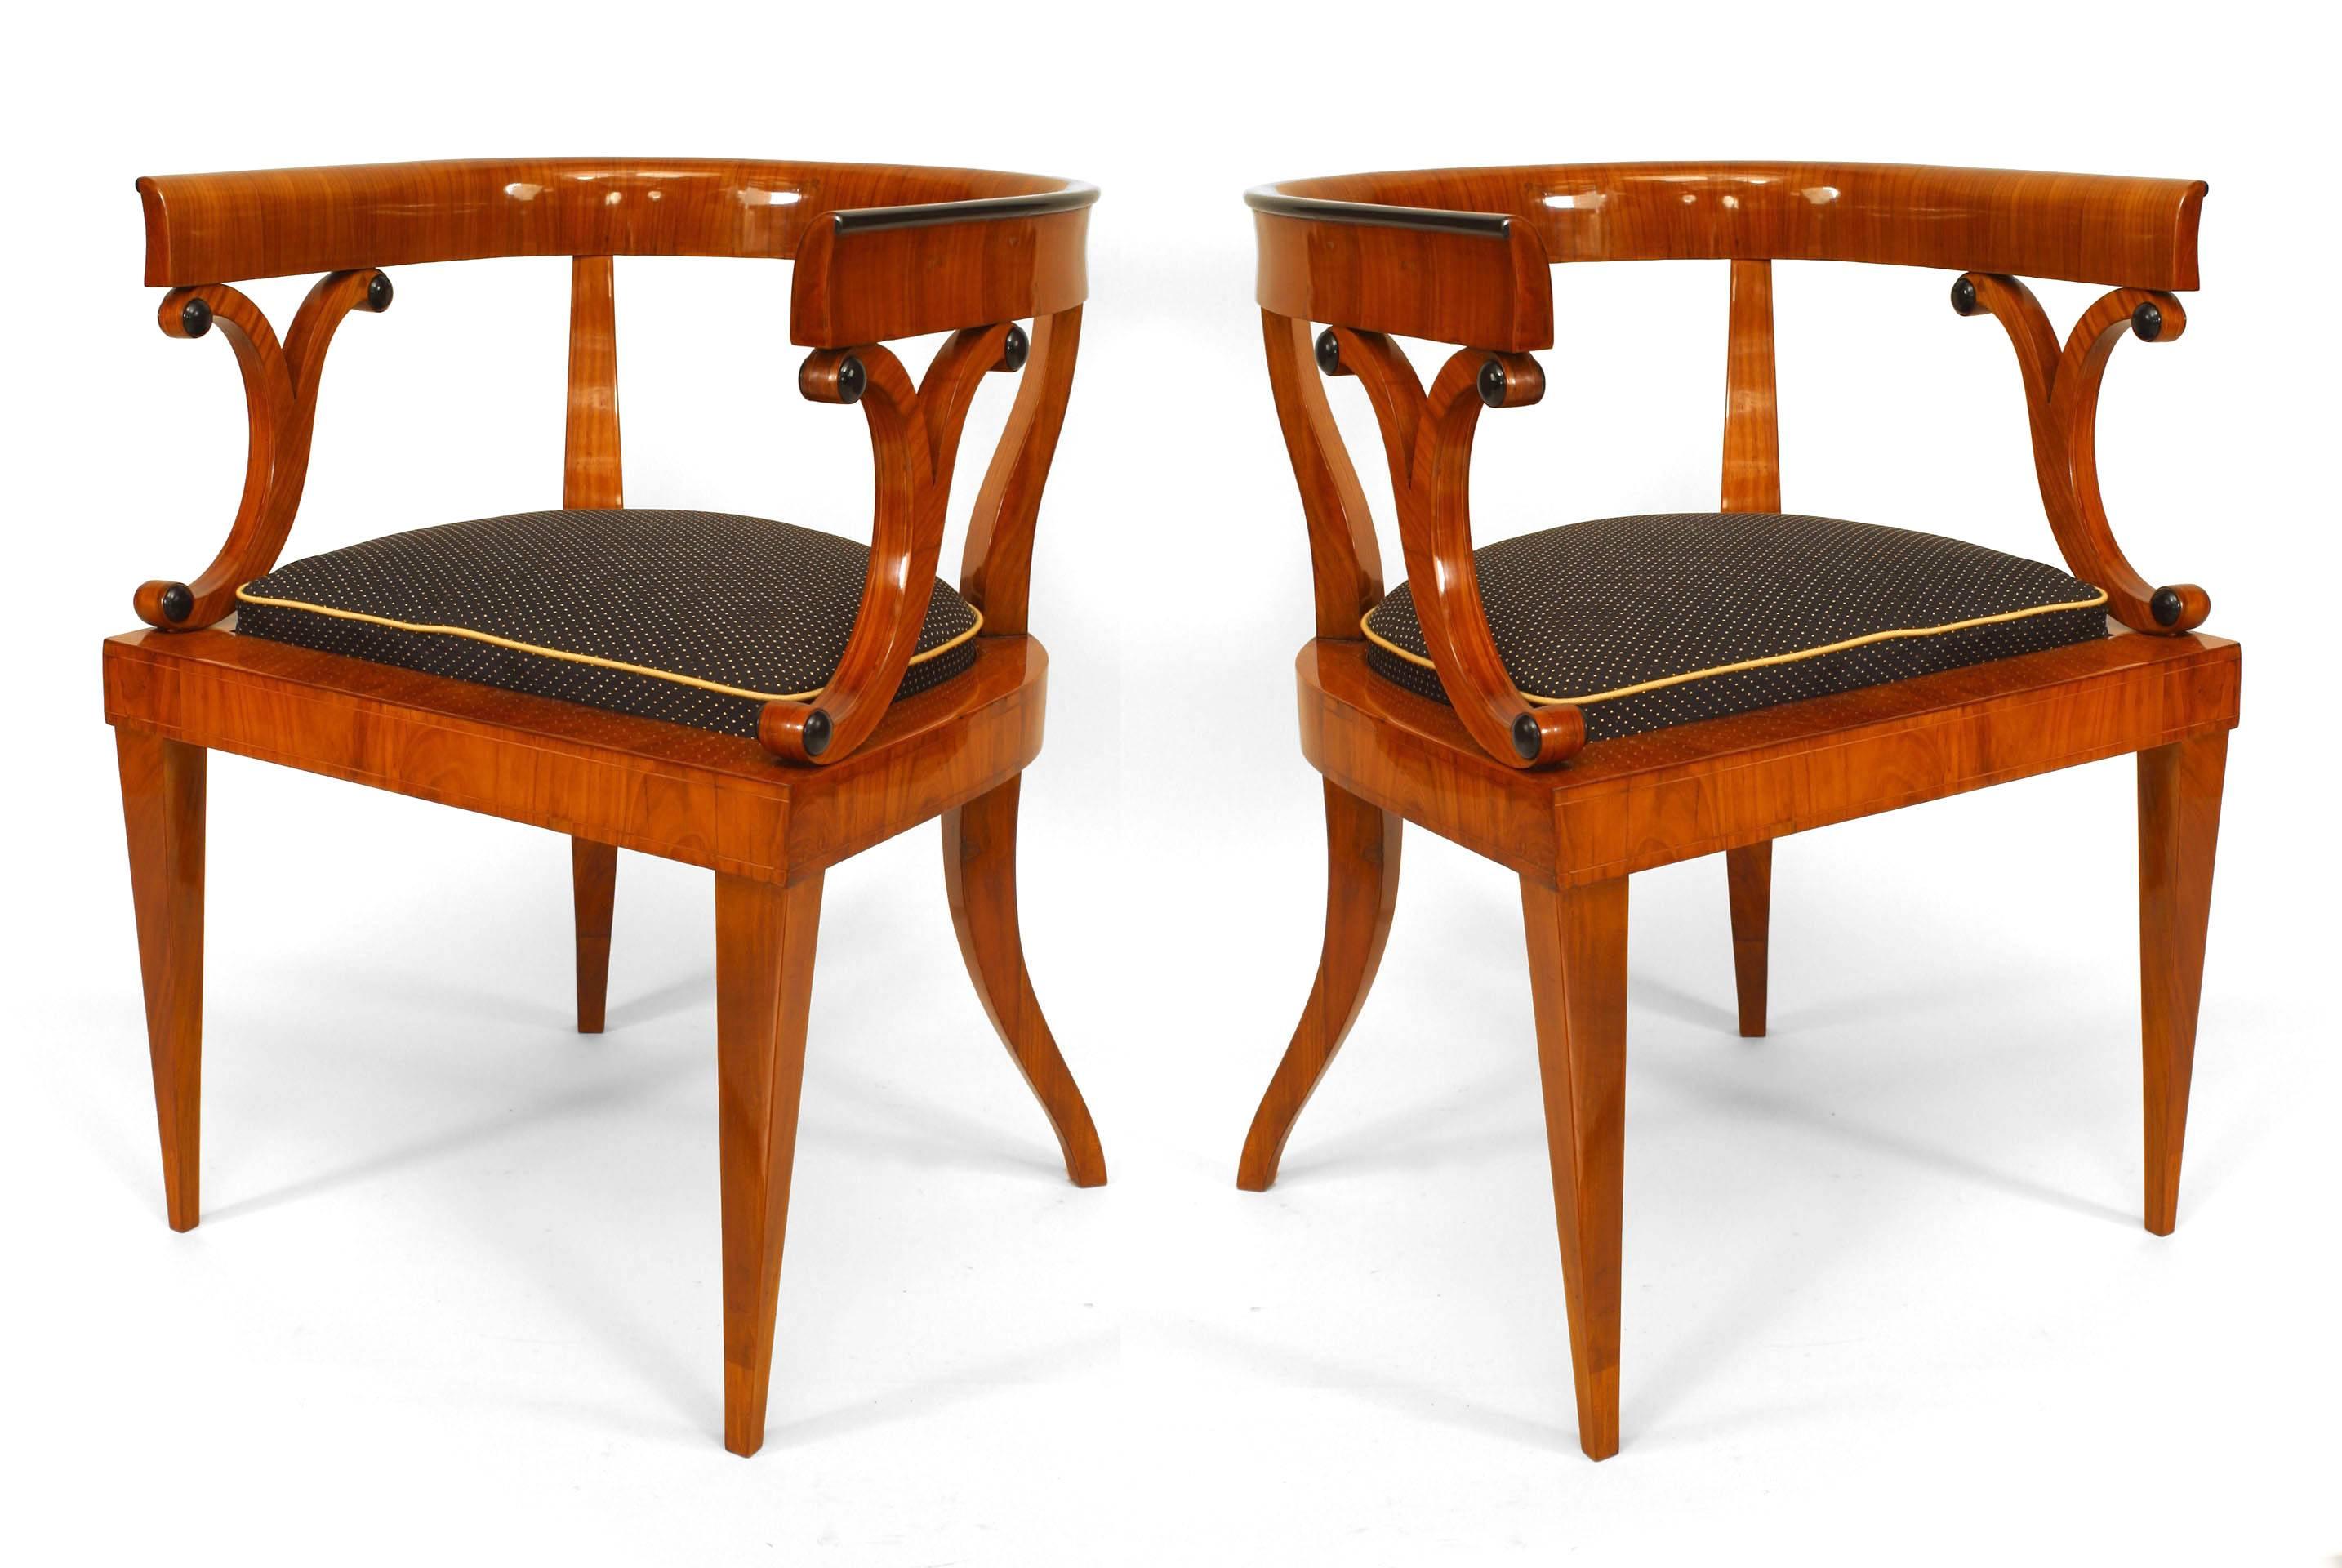 Pair of Austrian Biedermeier (1830s) cherry veneer armchairs with round back design and maple inlay & ebonized details with an inset upholstered seat.
